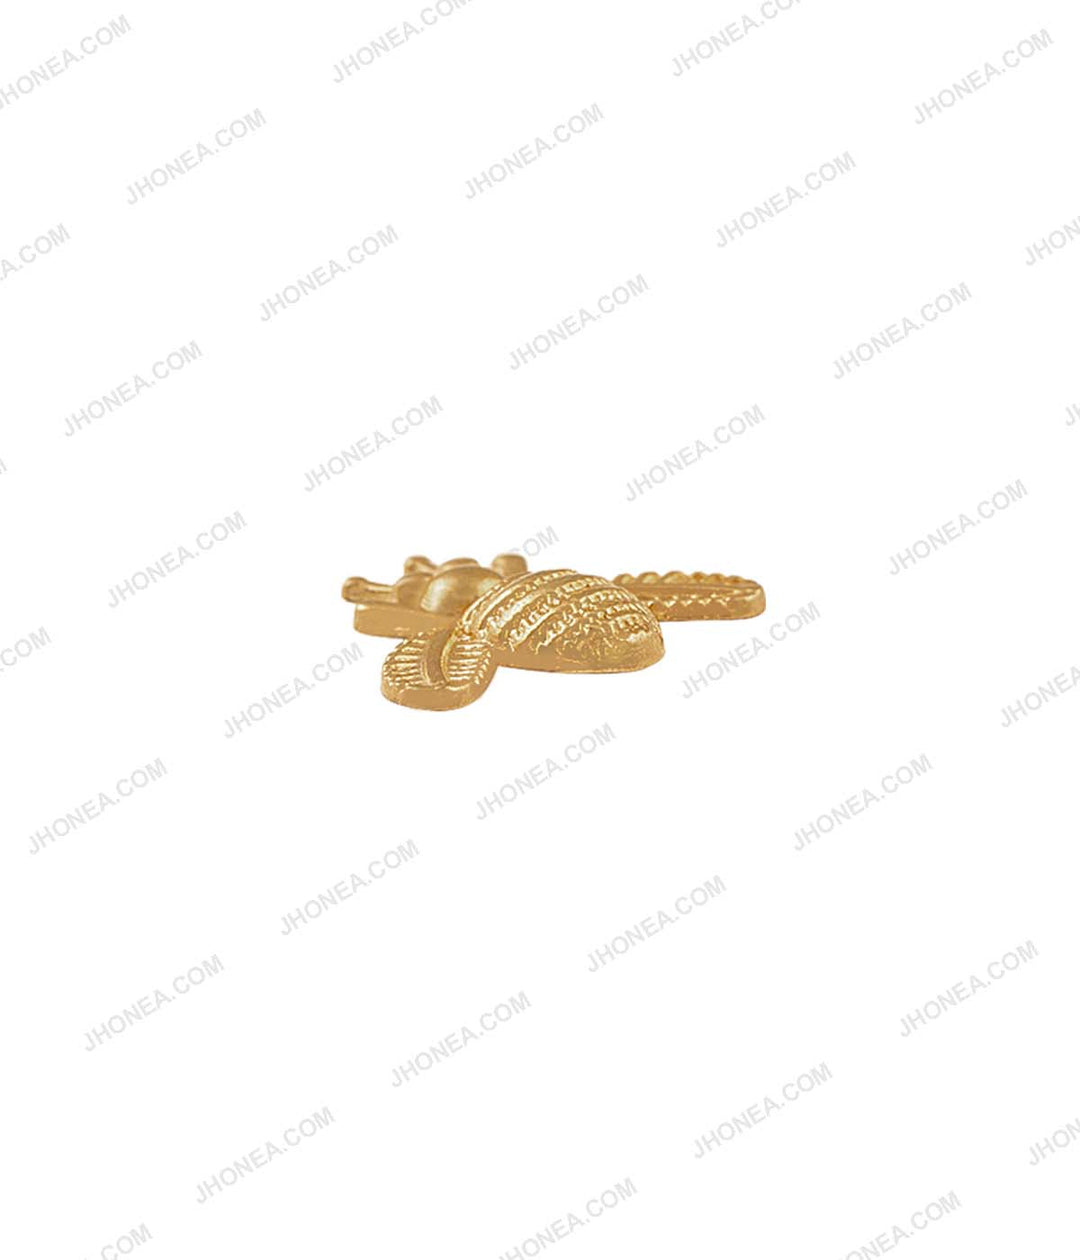 Engraved Honeybee Design Iron On Hot Fix for Suits/Blazers